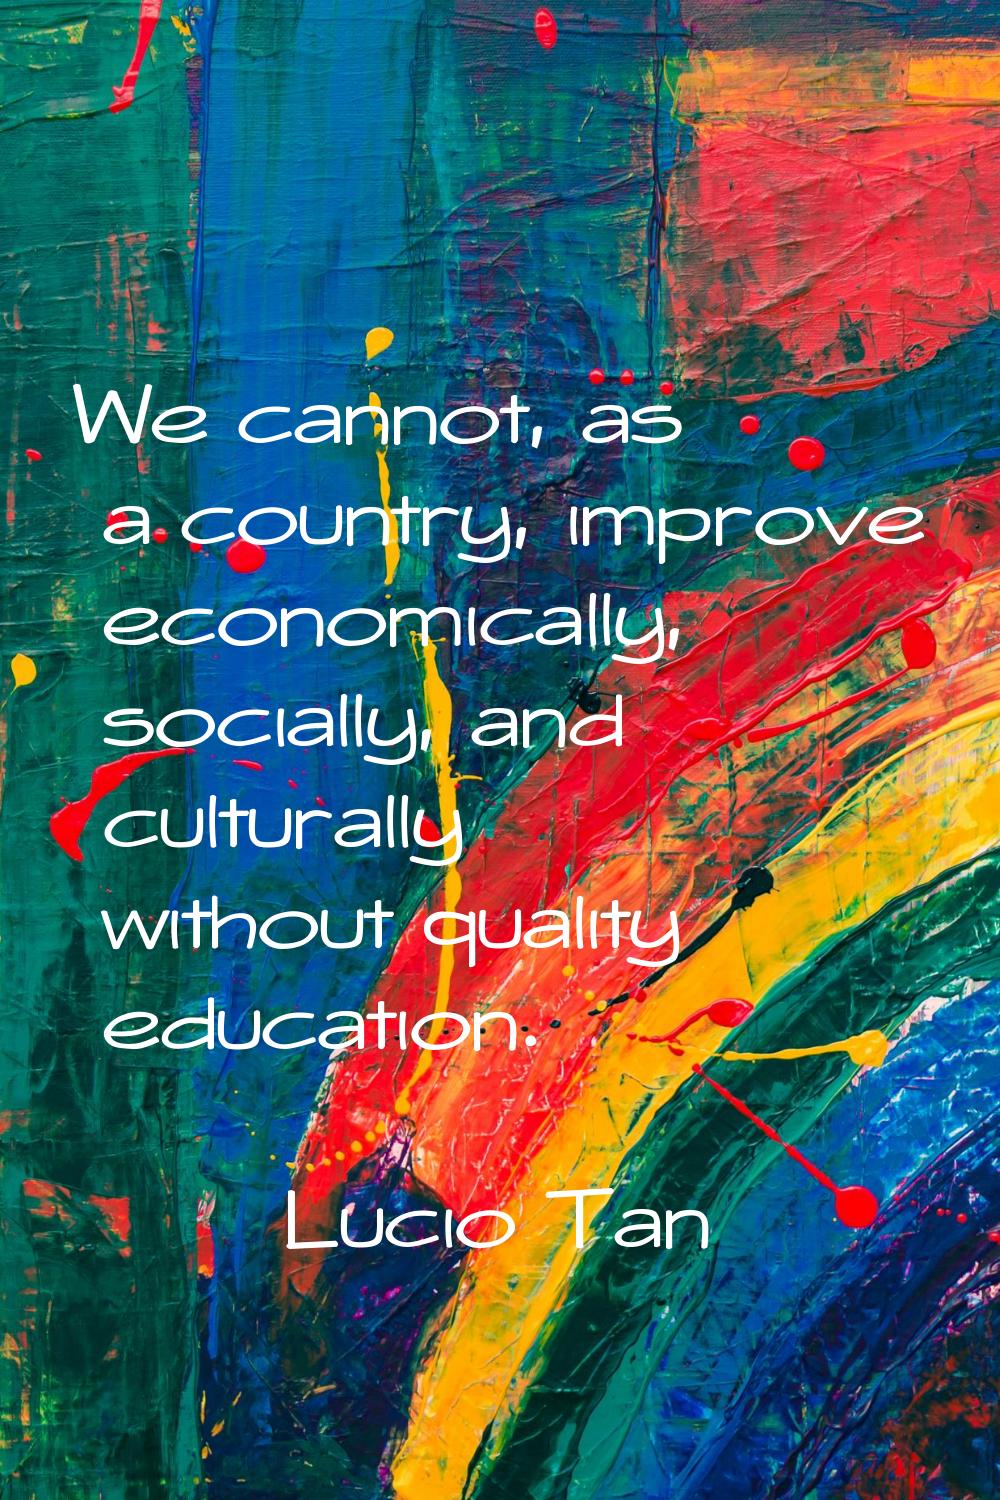 We cannot, as a country, improve economically, socially, and culturally without quality education.